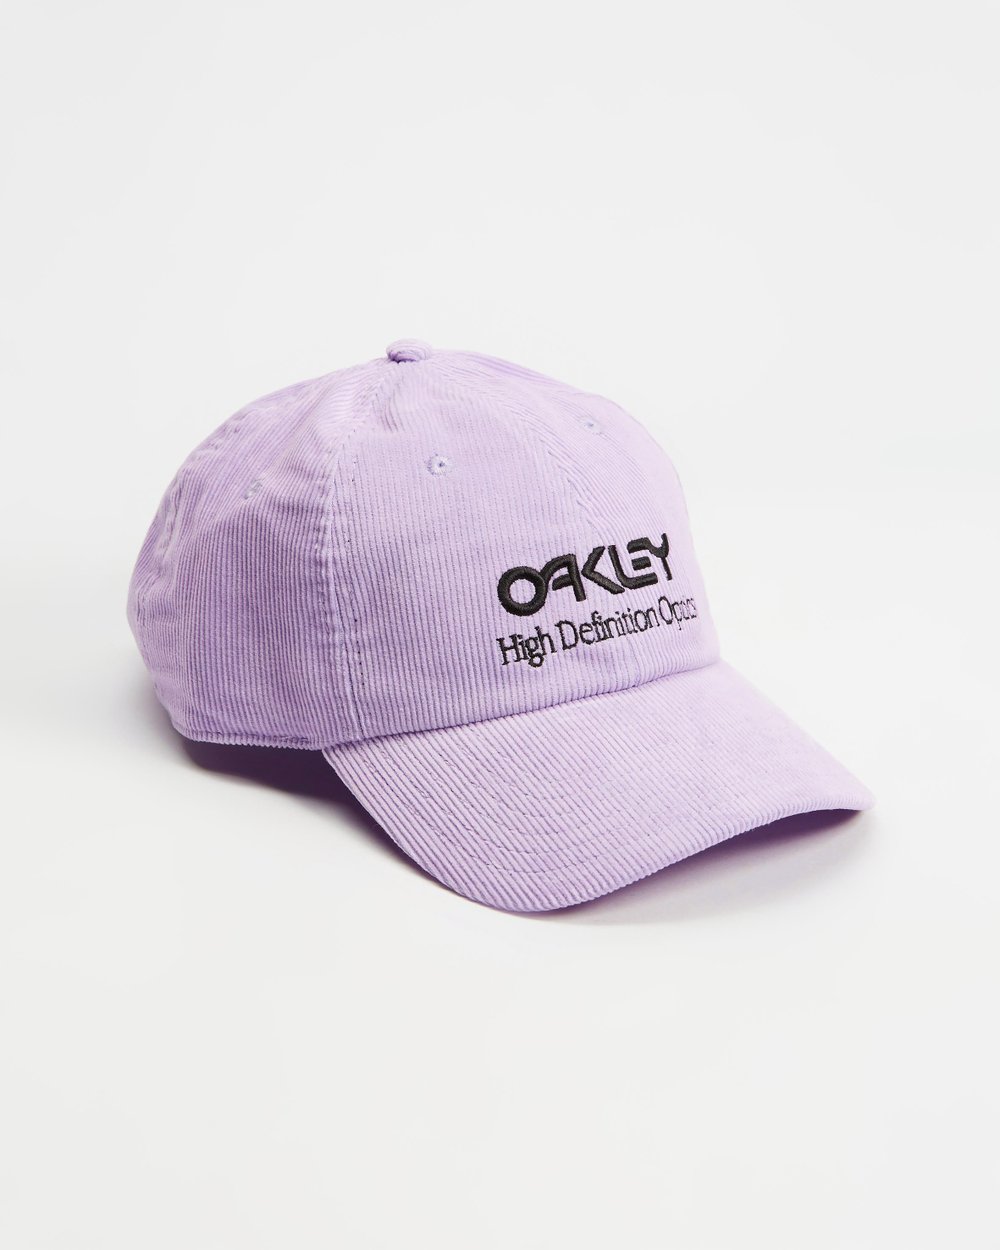 Oakley High Definition Cap - Cables Wake Park